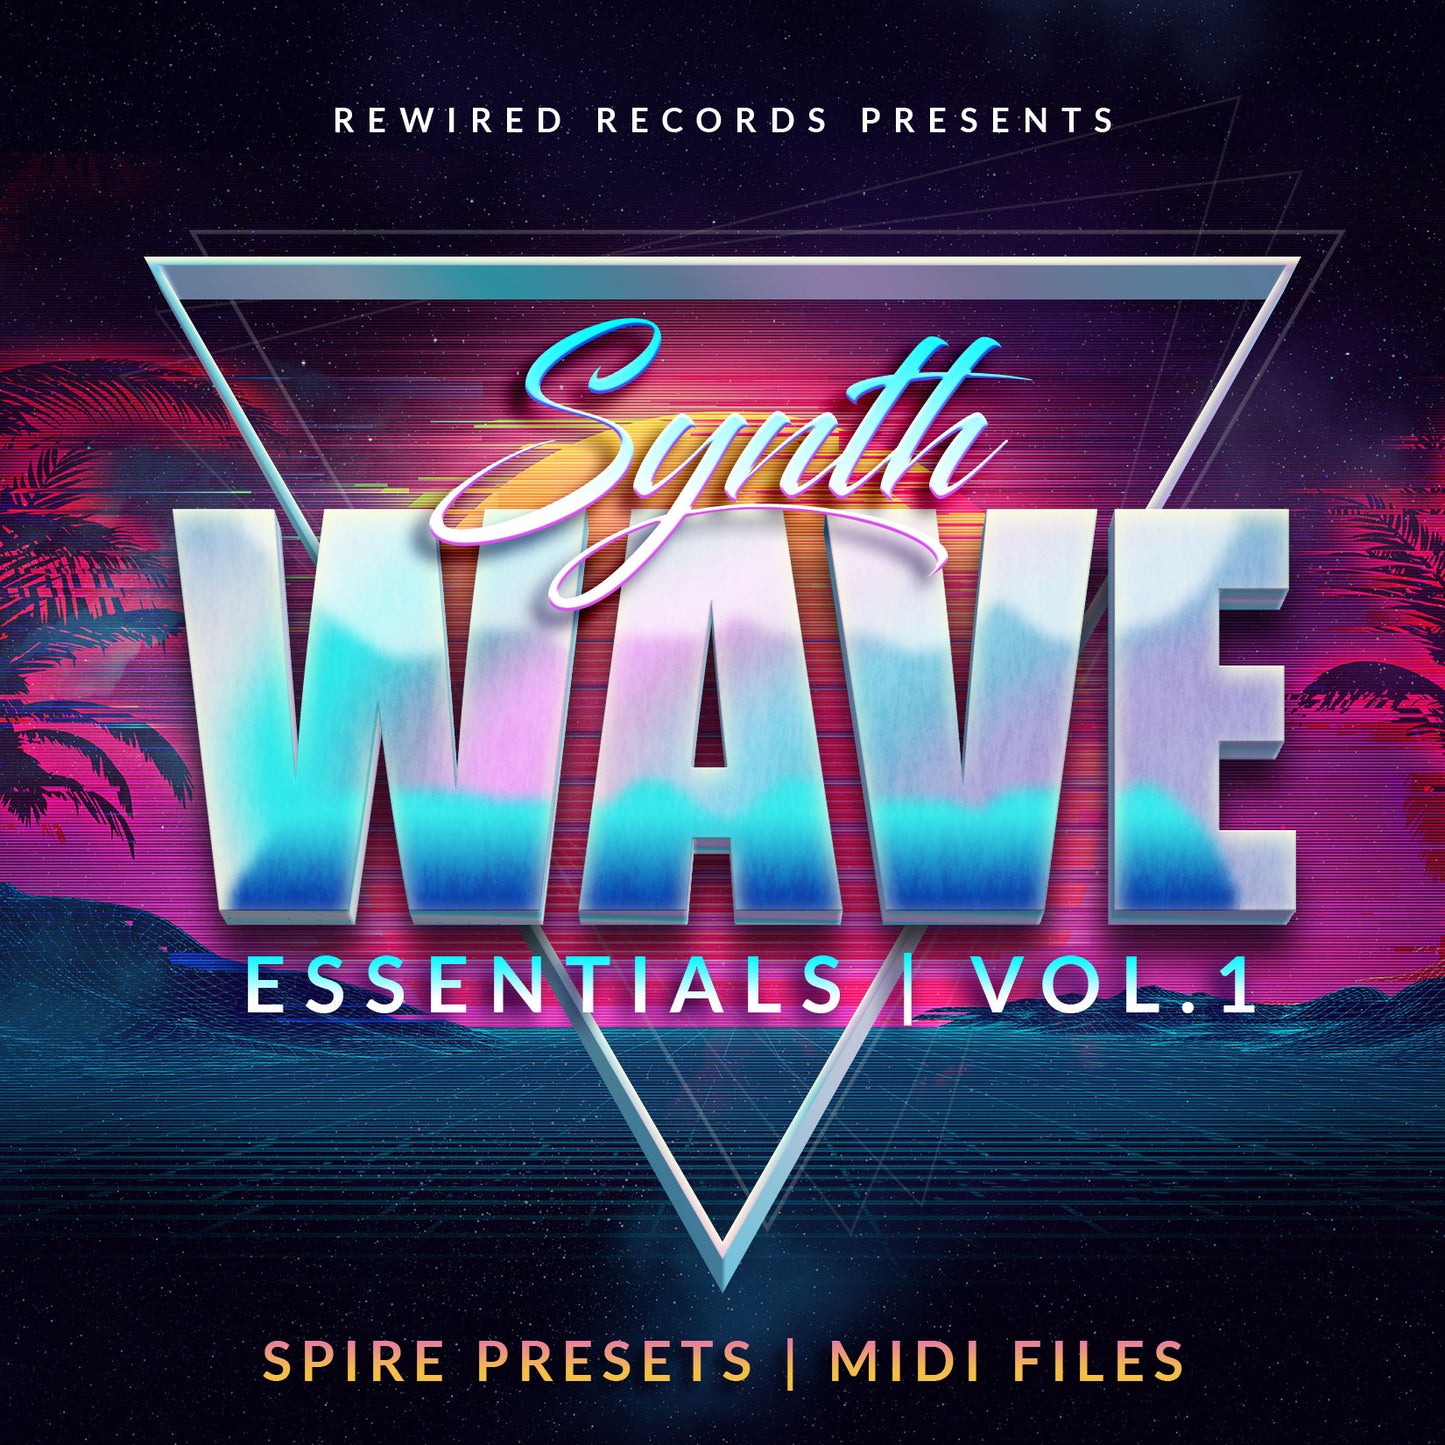 SynthWave Essentials Vol 1 for Spire - Rewired Records